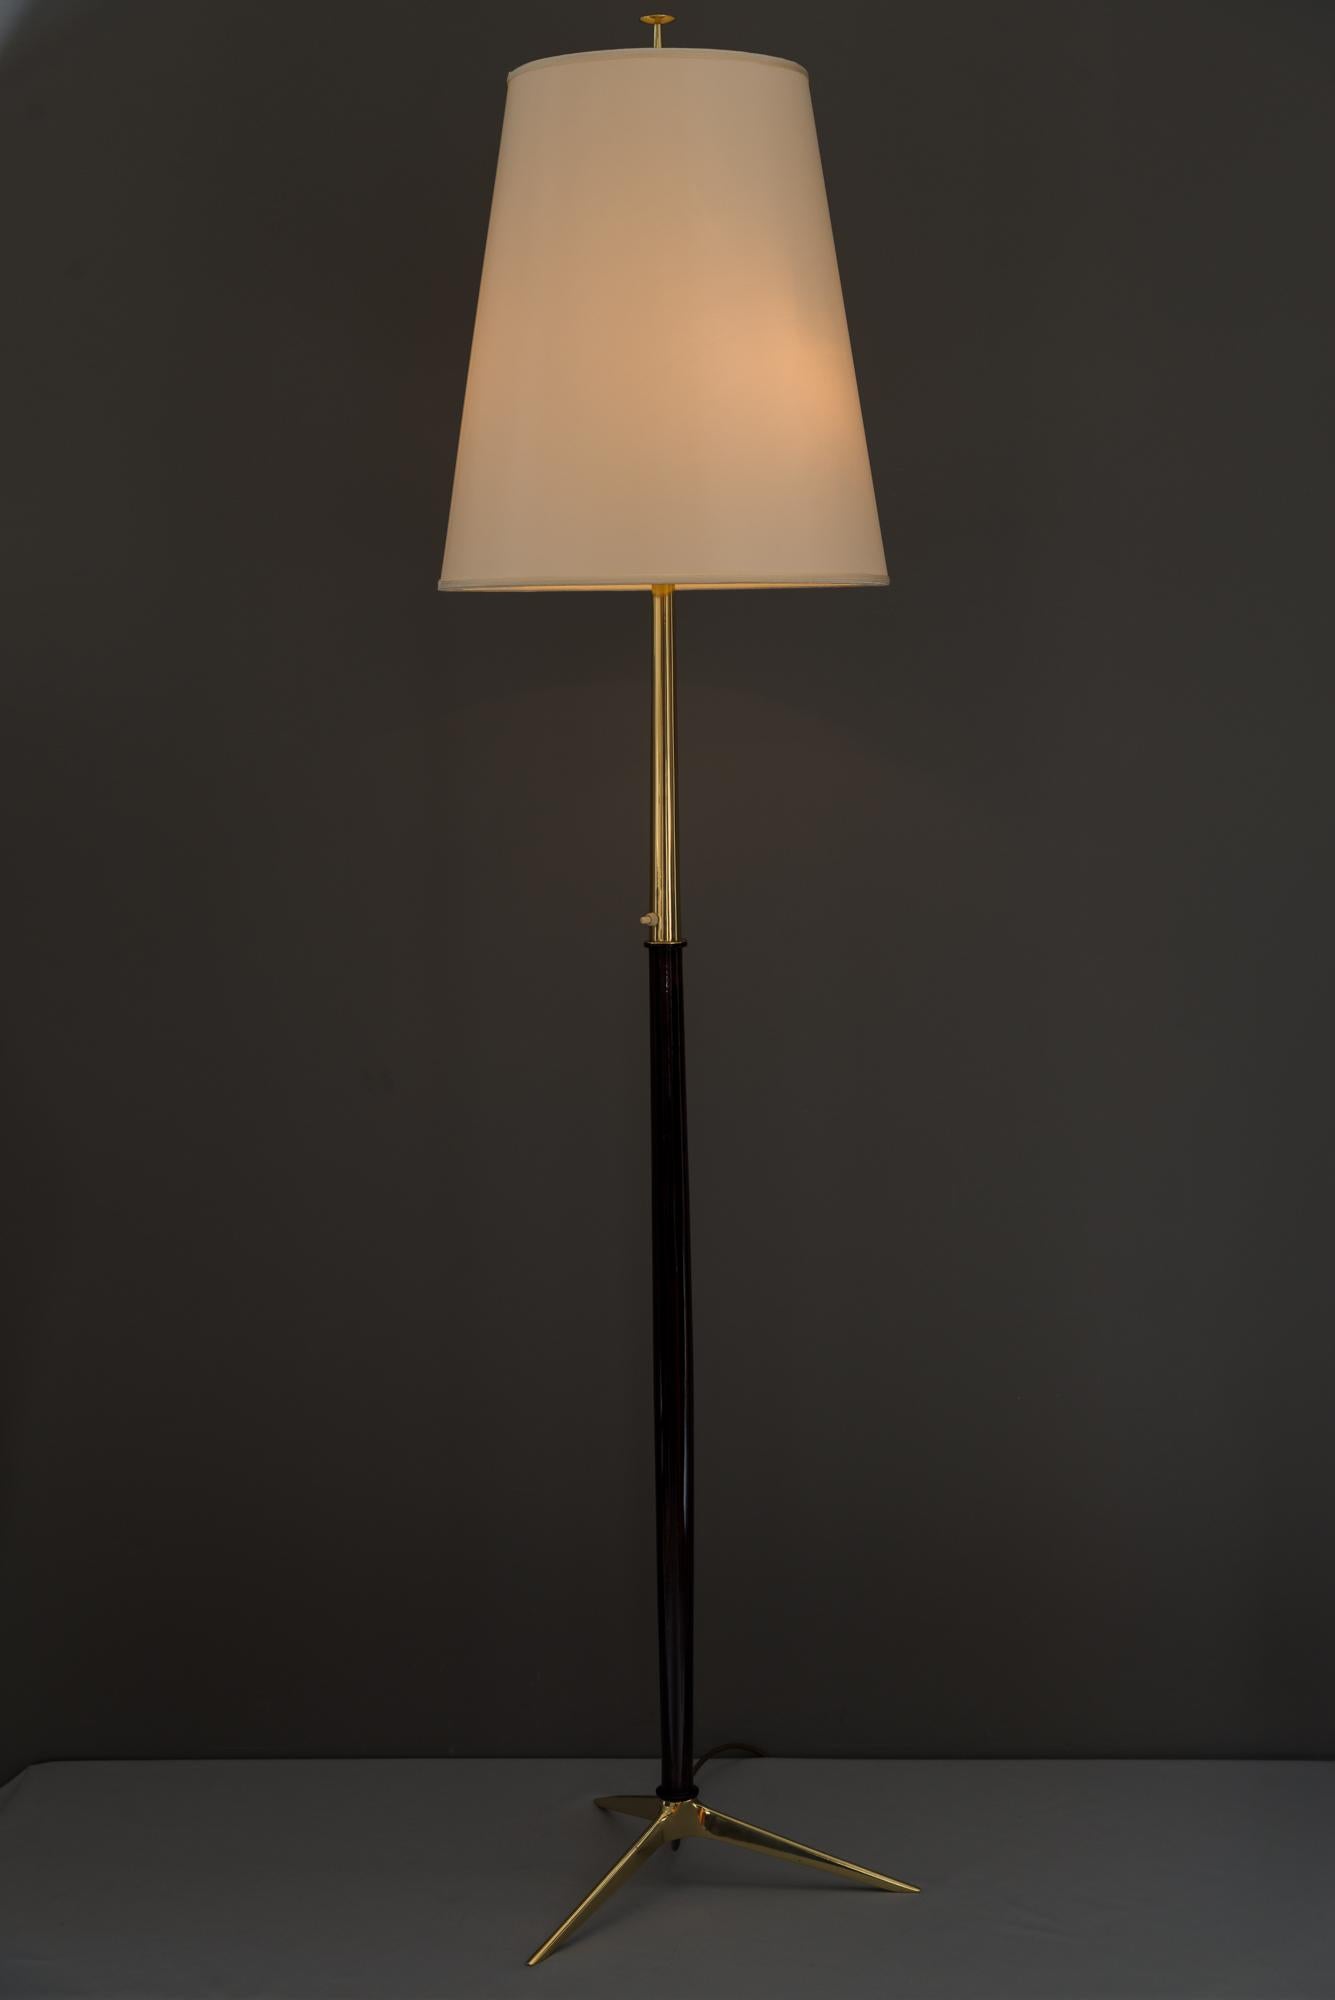 Lacquered Rupert Nikoll Floor Lamp, circa 1950s For Sale